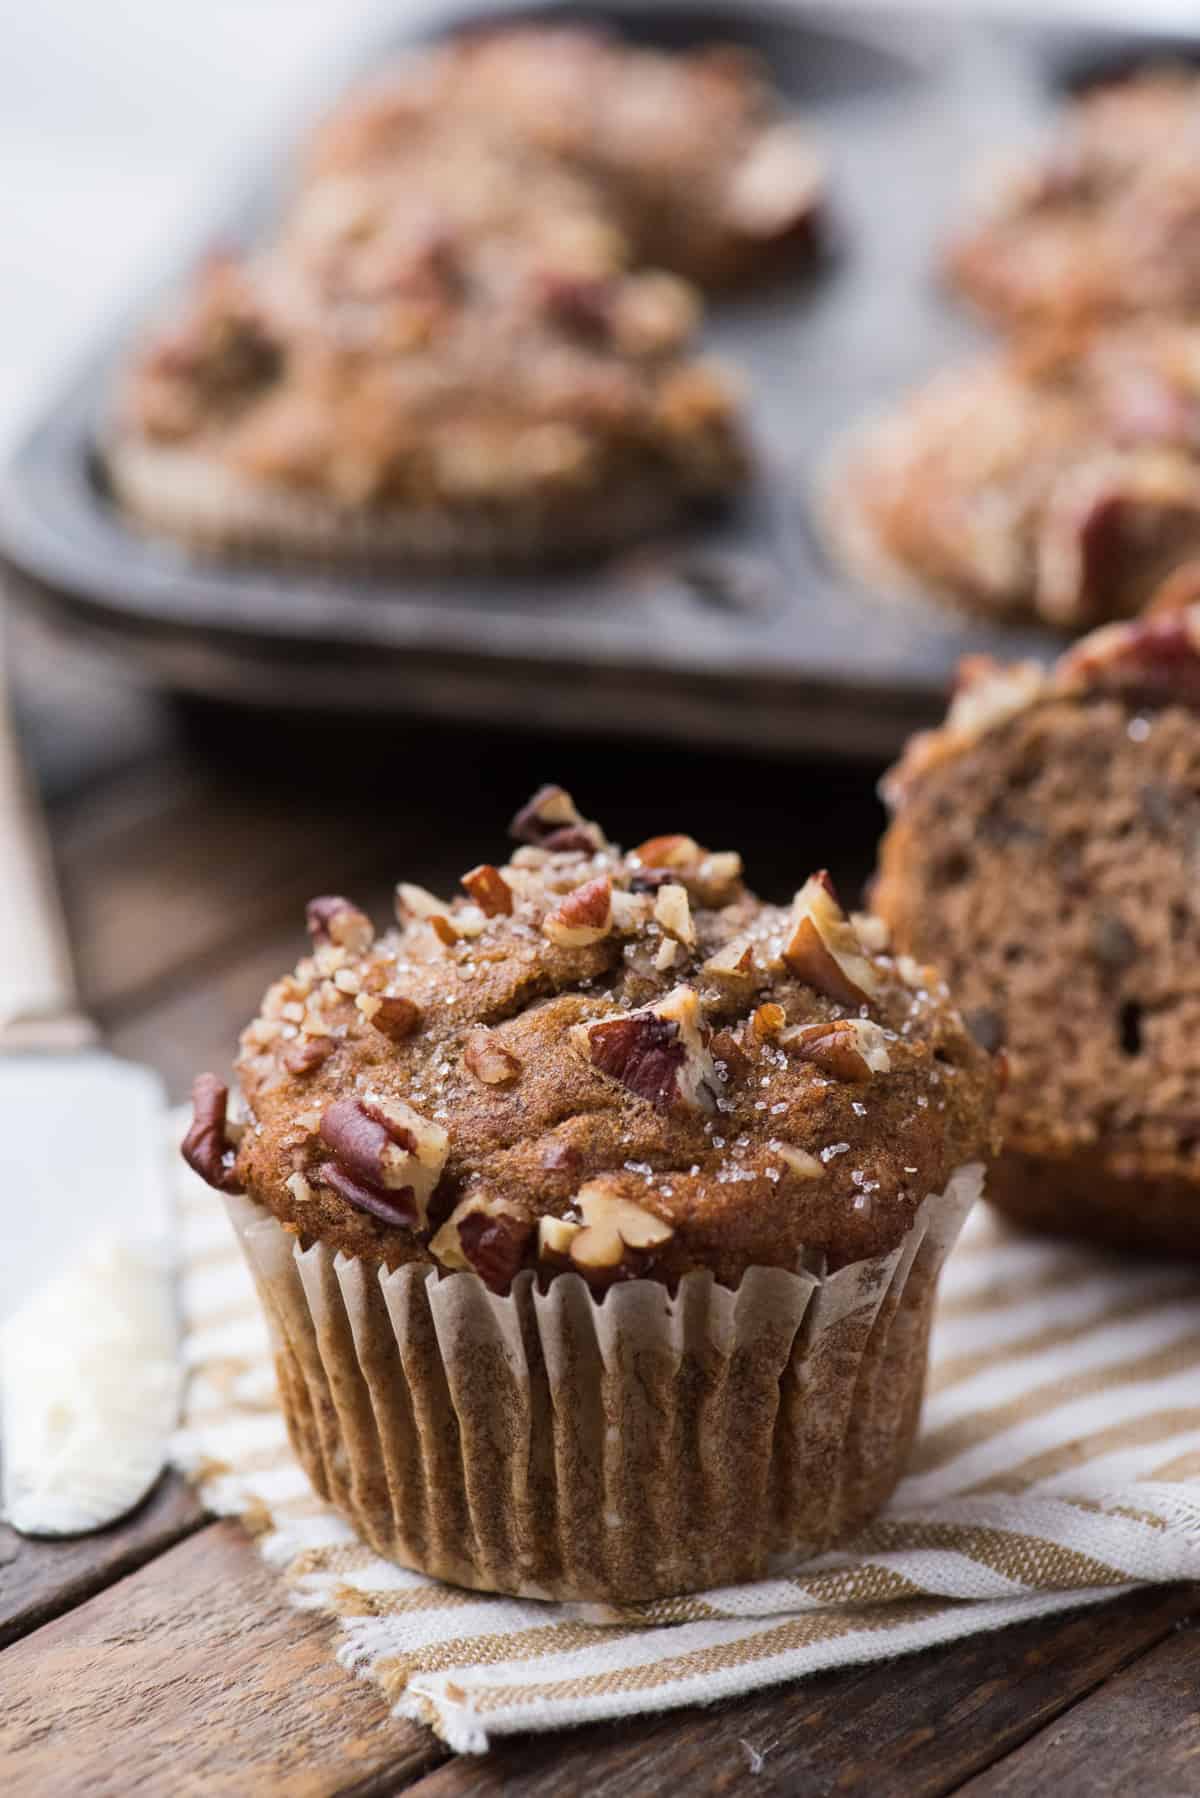 banana nut muffin on striped linen towel with muffin pan in the background on dark wood background